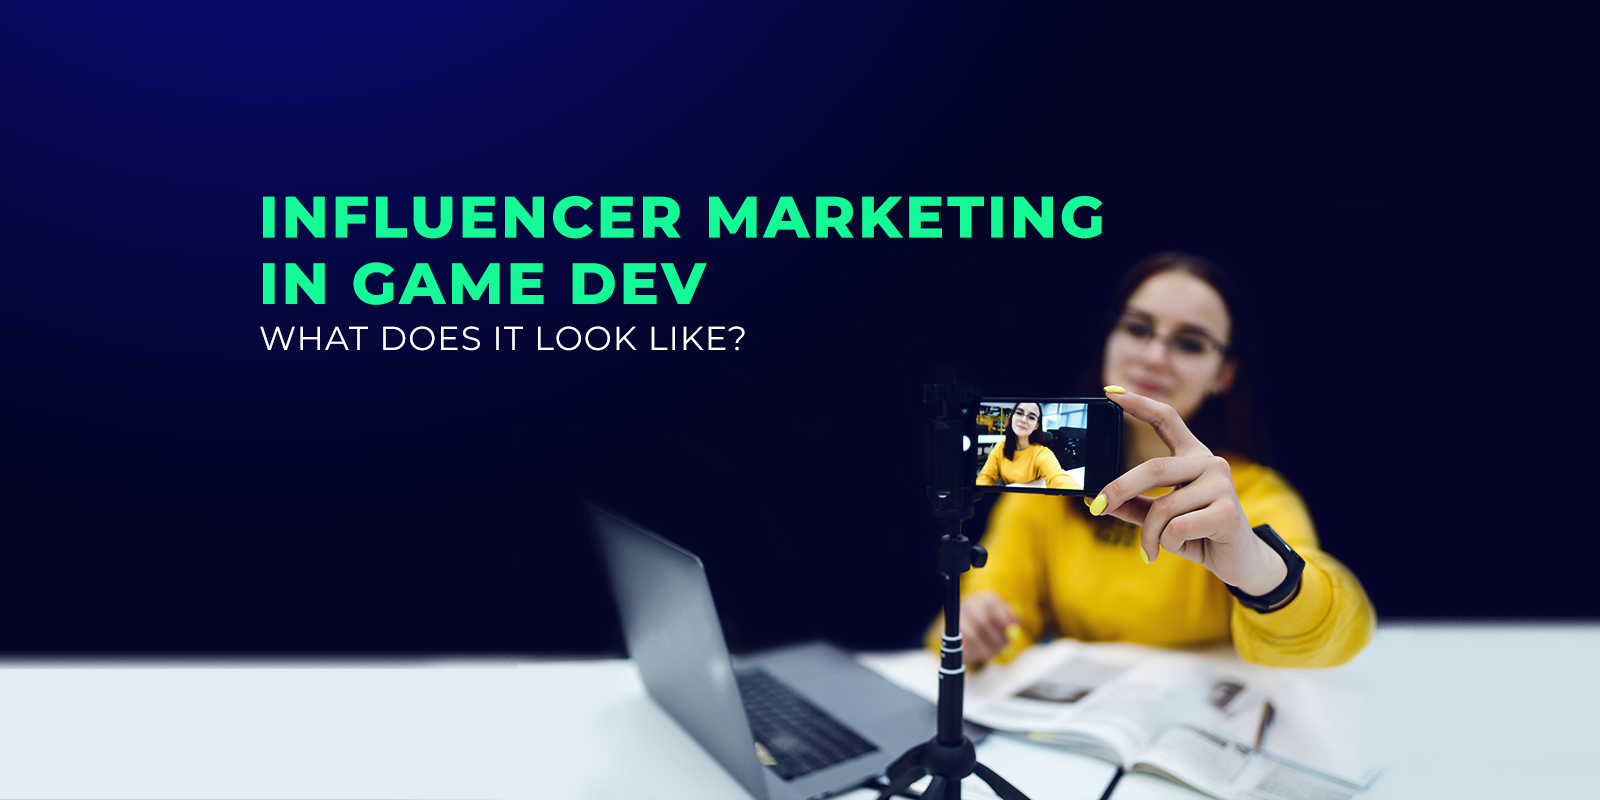 What’s it like to be an Influencer Marketing Specialist?